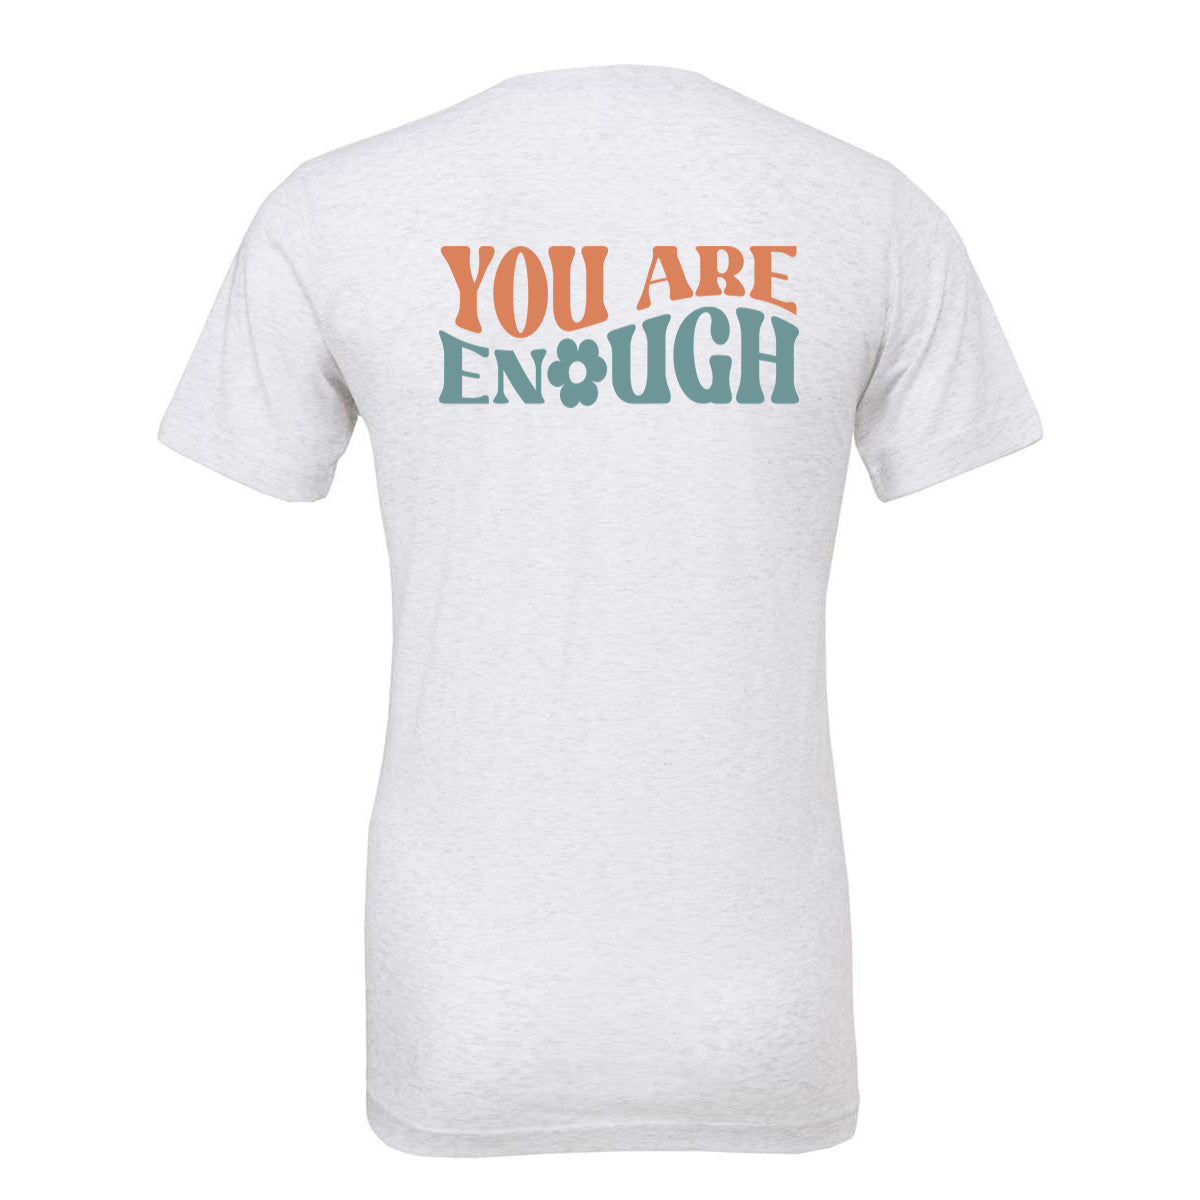 You Are Enough - Ash Tee - Southern Grace Creations